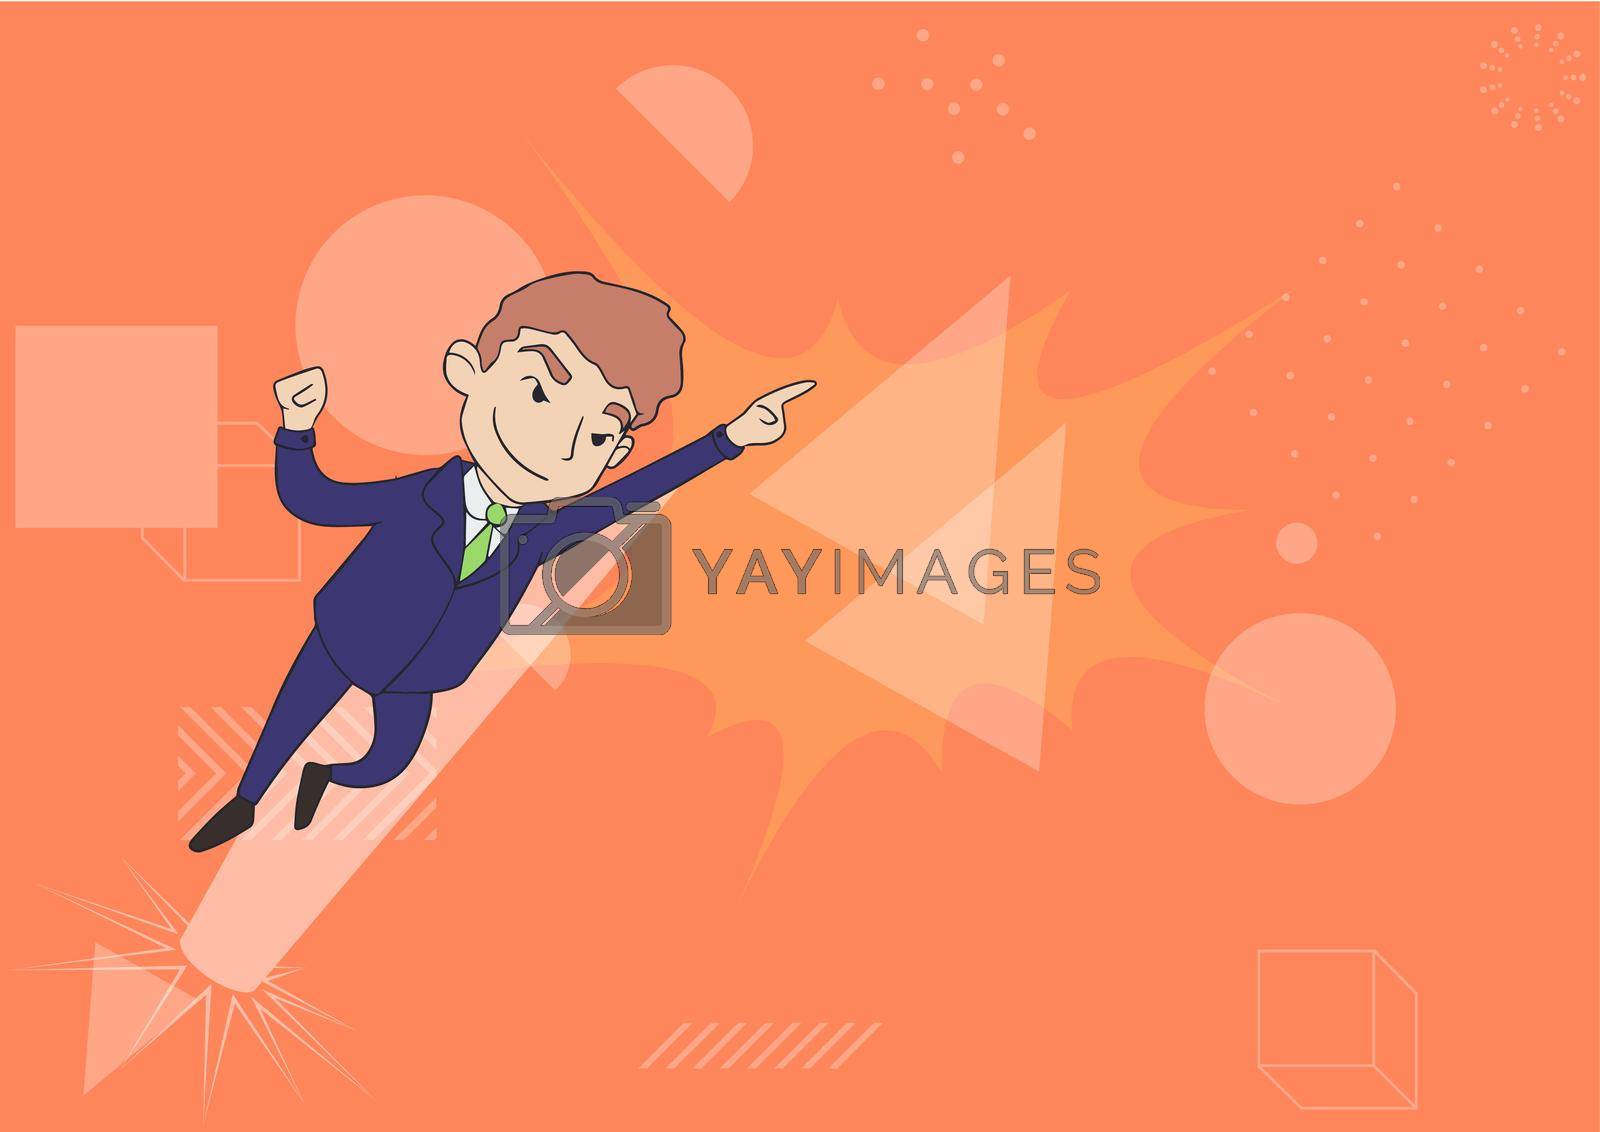 Royalty free image of Happy Man In Uniform Standing Drawing Pointing Upward Displaying Leadership. Gentleman In Suit Design Stands And Points Up Showing Authority And Dominance. by nialowwa